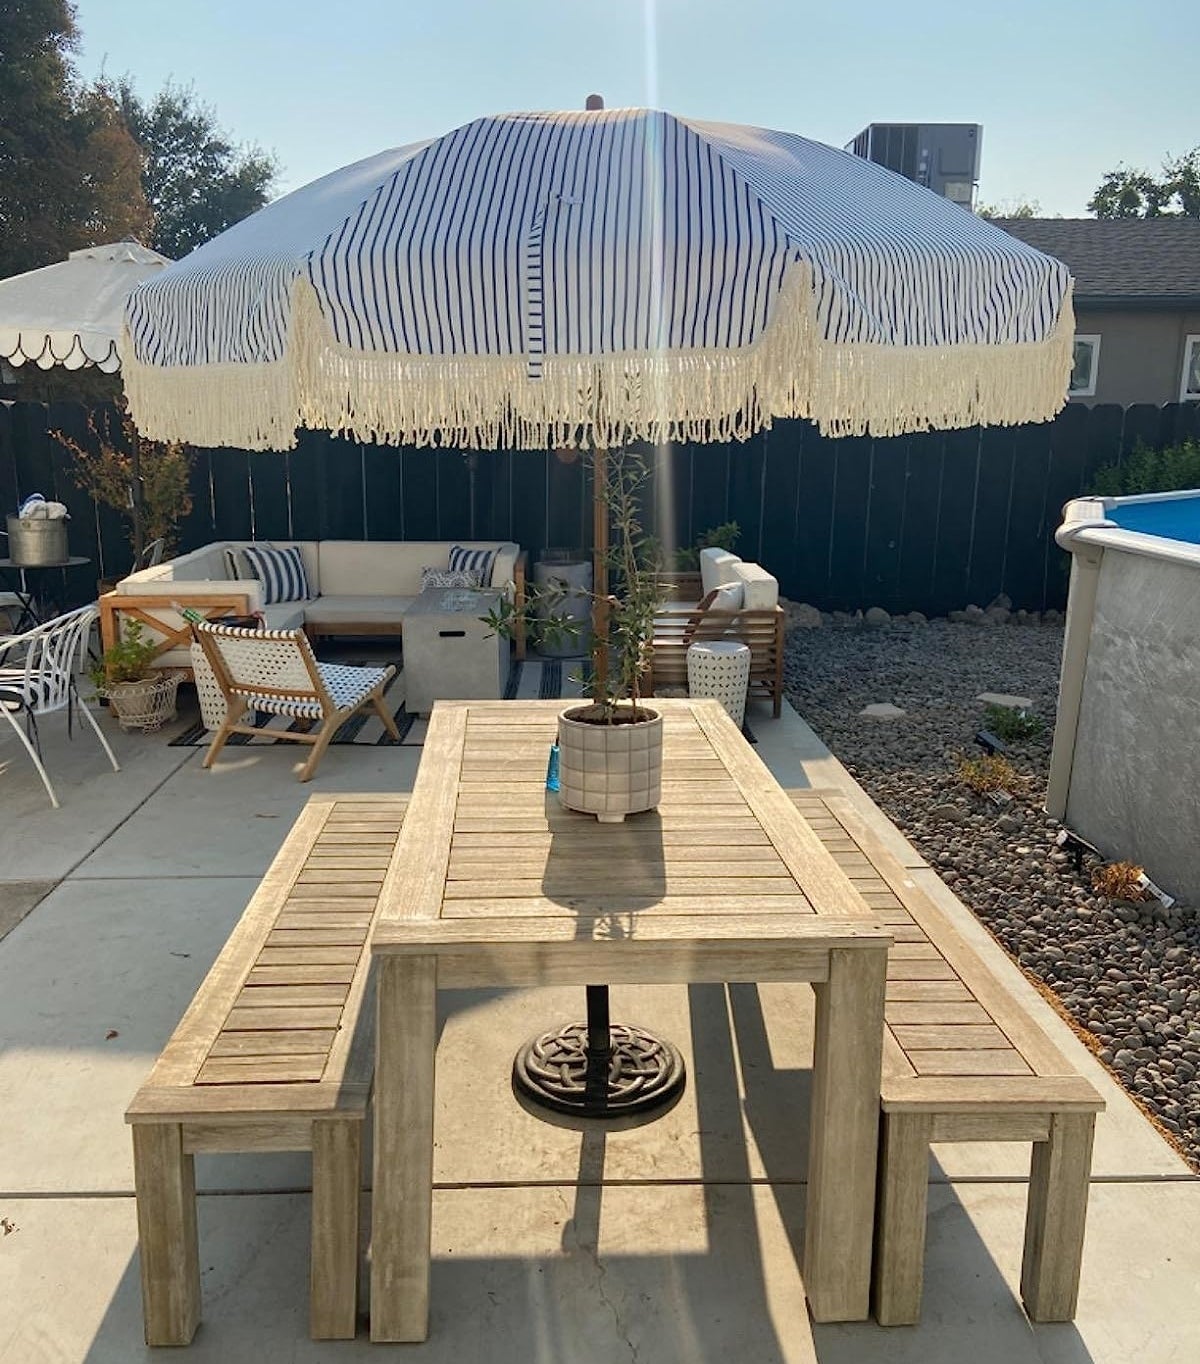 Reviewer image of the striped umbrella on their outdoor dining set